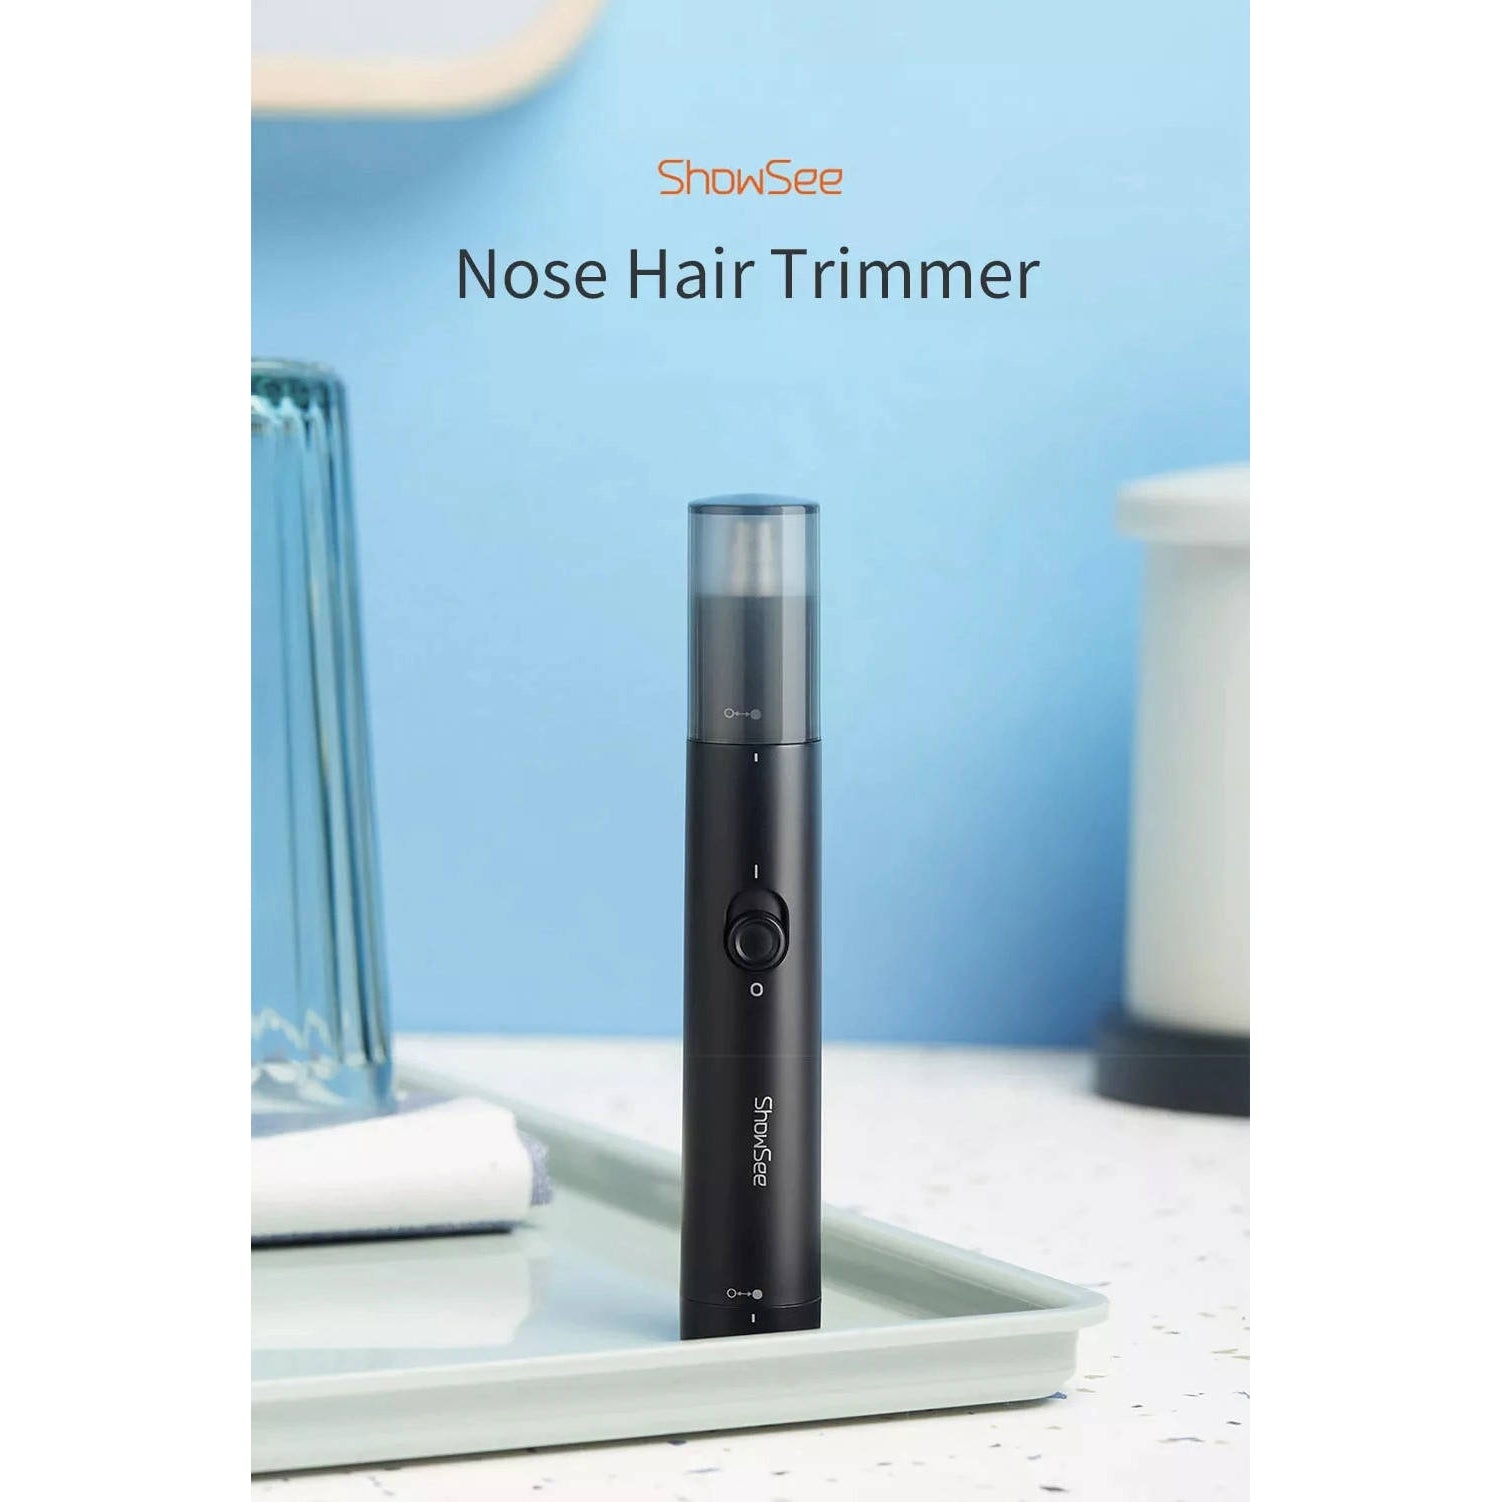 Showsee Small Nose Hair Trimmer - Black